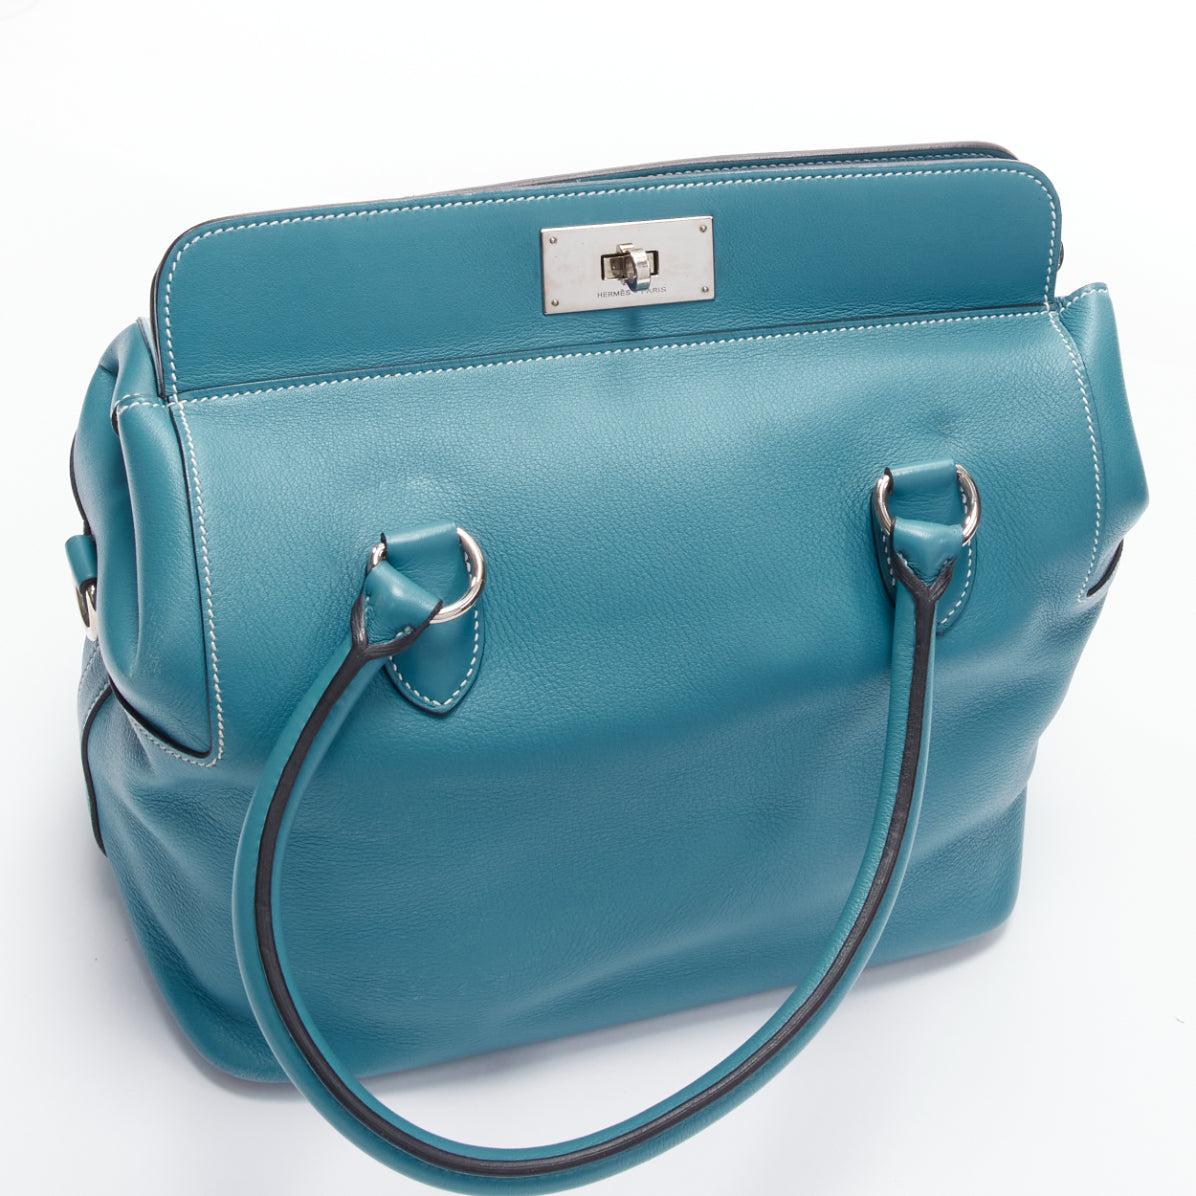 HERMES Toolbox 26 teal blue grained leather SHW top handle satchel For Sale 3